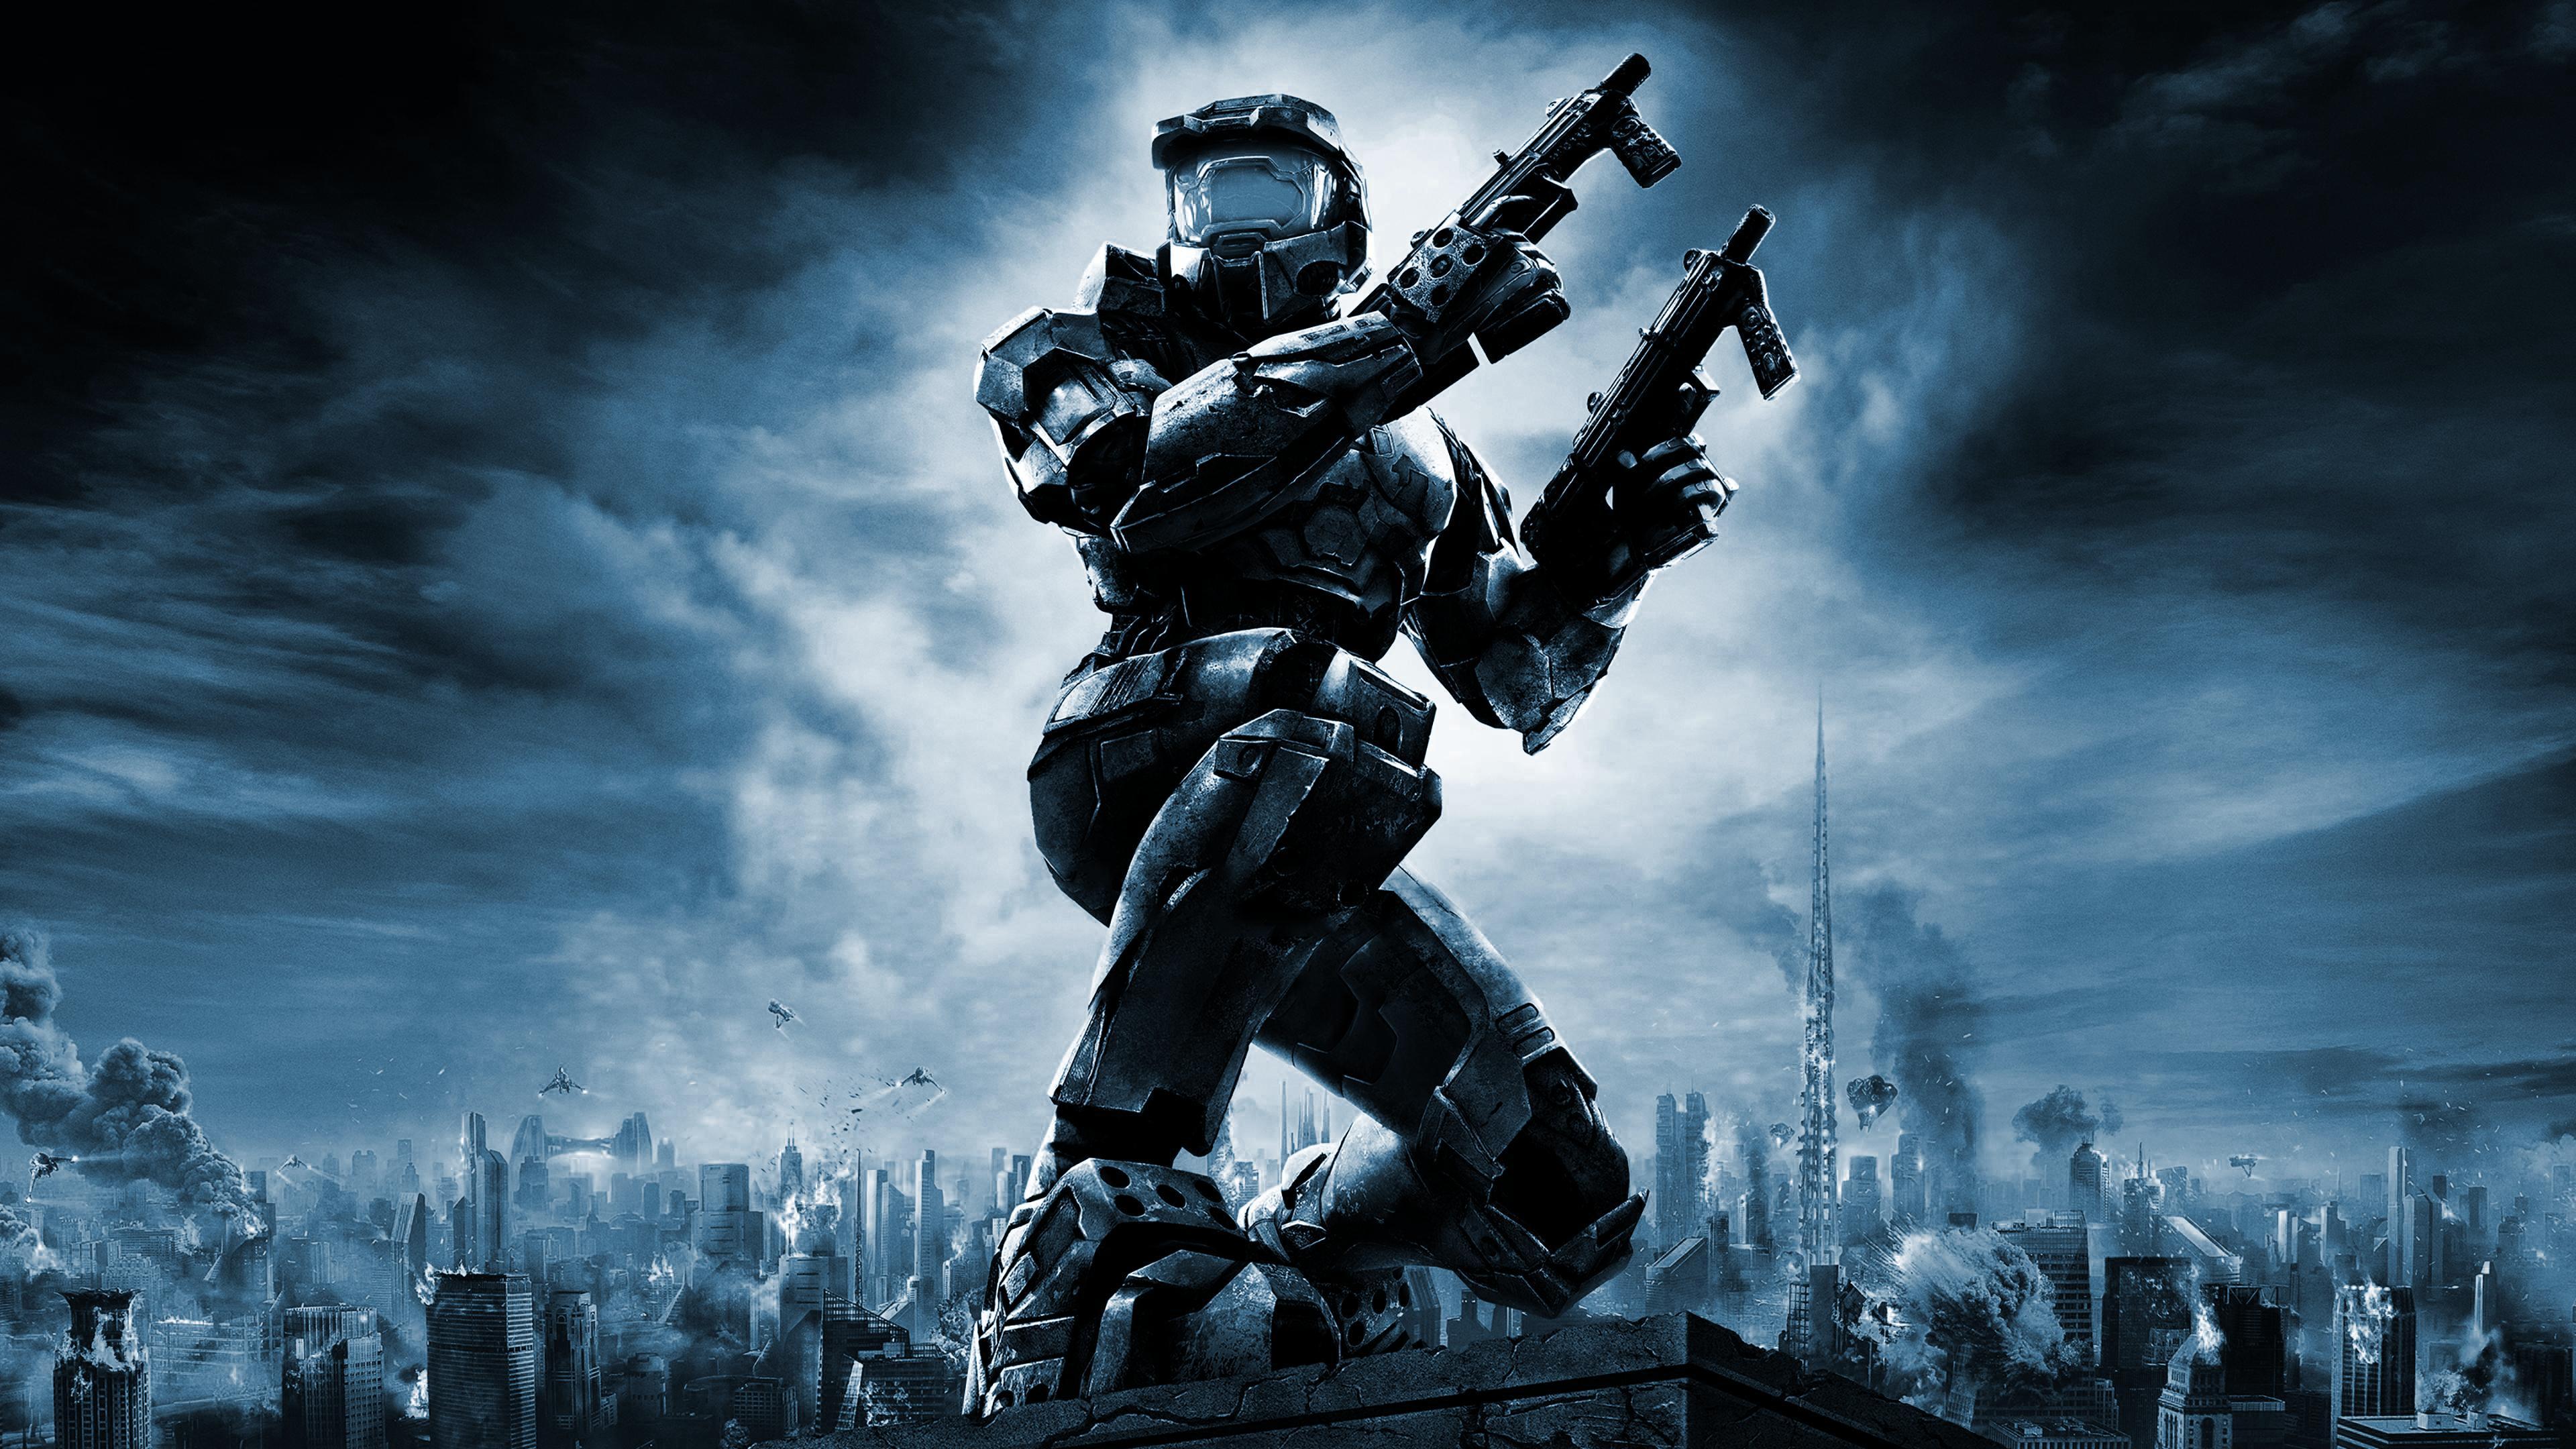 Halo 3 Wallpapers - Top Free Halo 3 Backgrounds ...